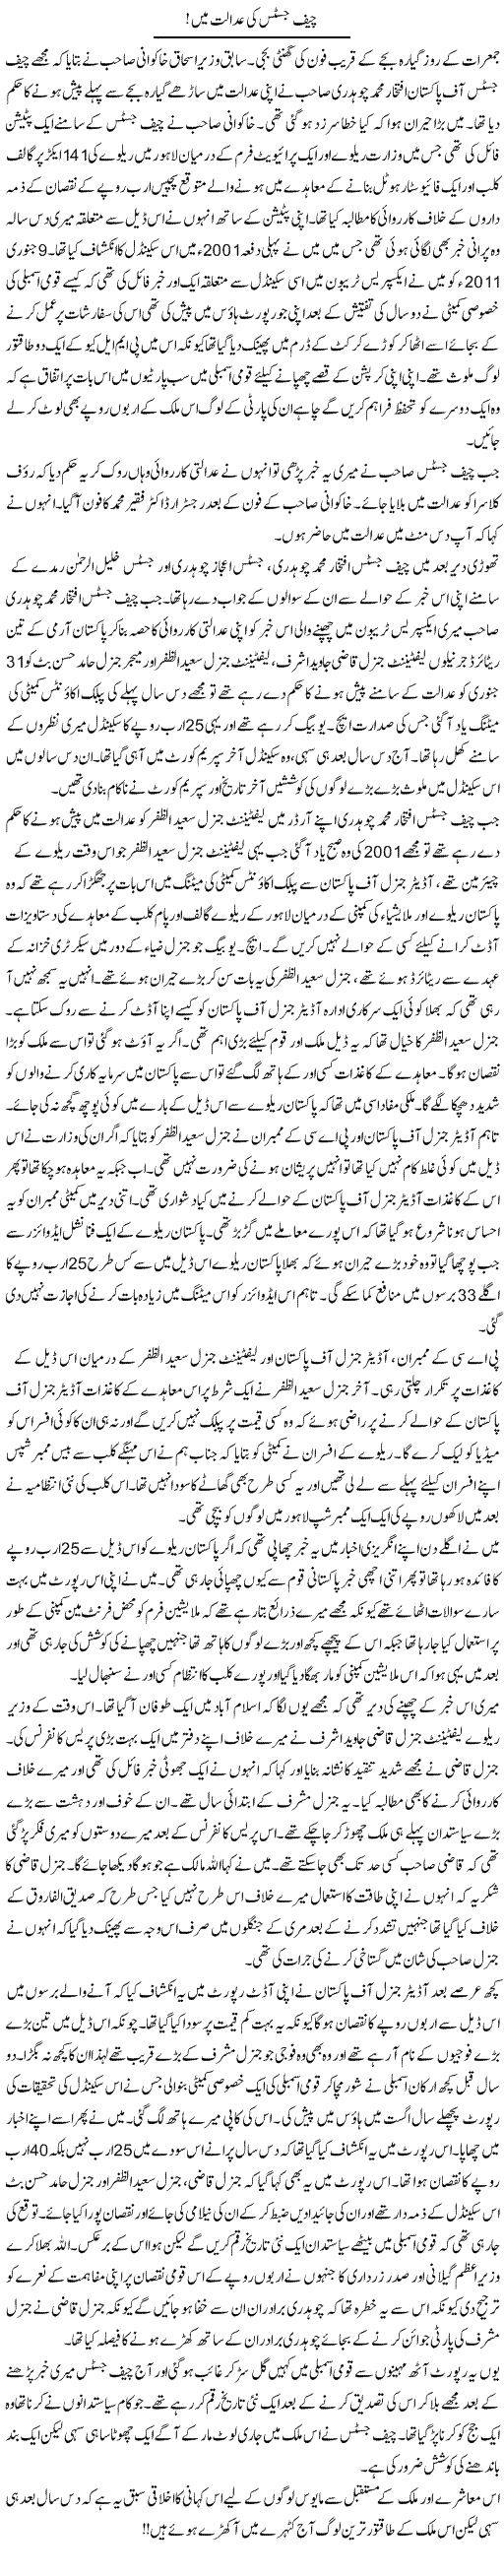 In Court of Chief Justice Express Column Rauf Klasra 16 January 2011